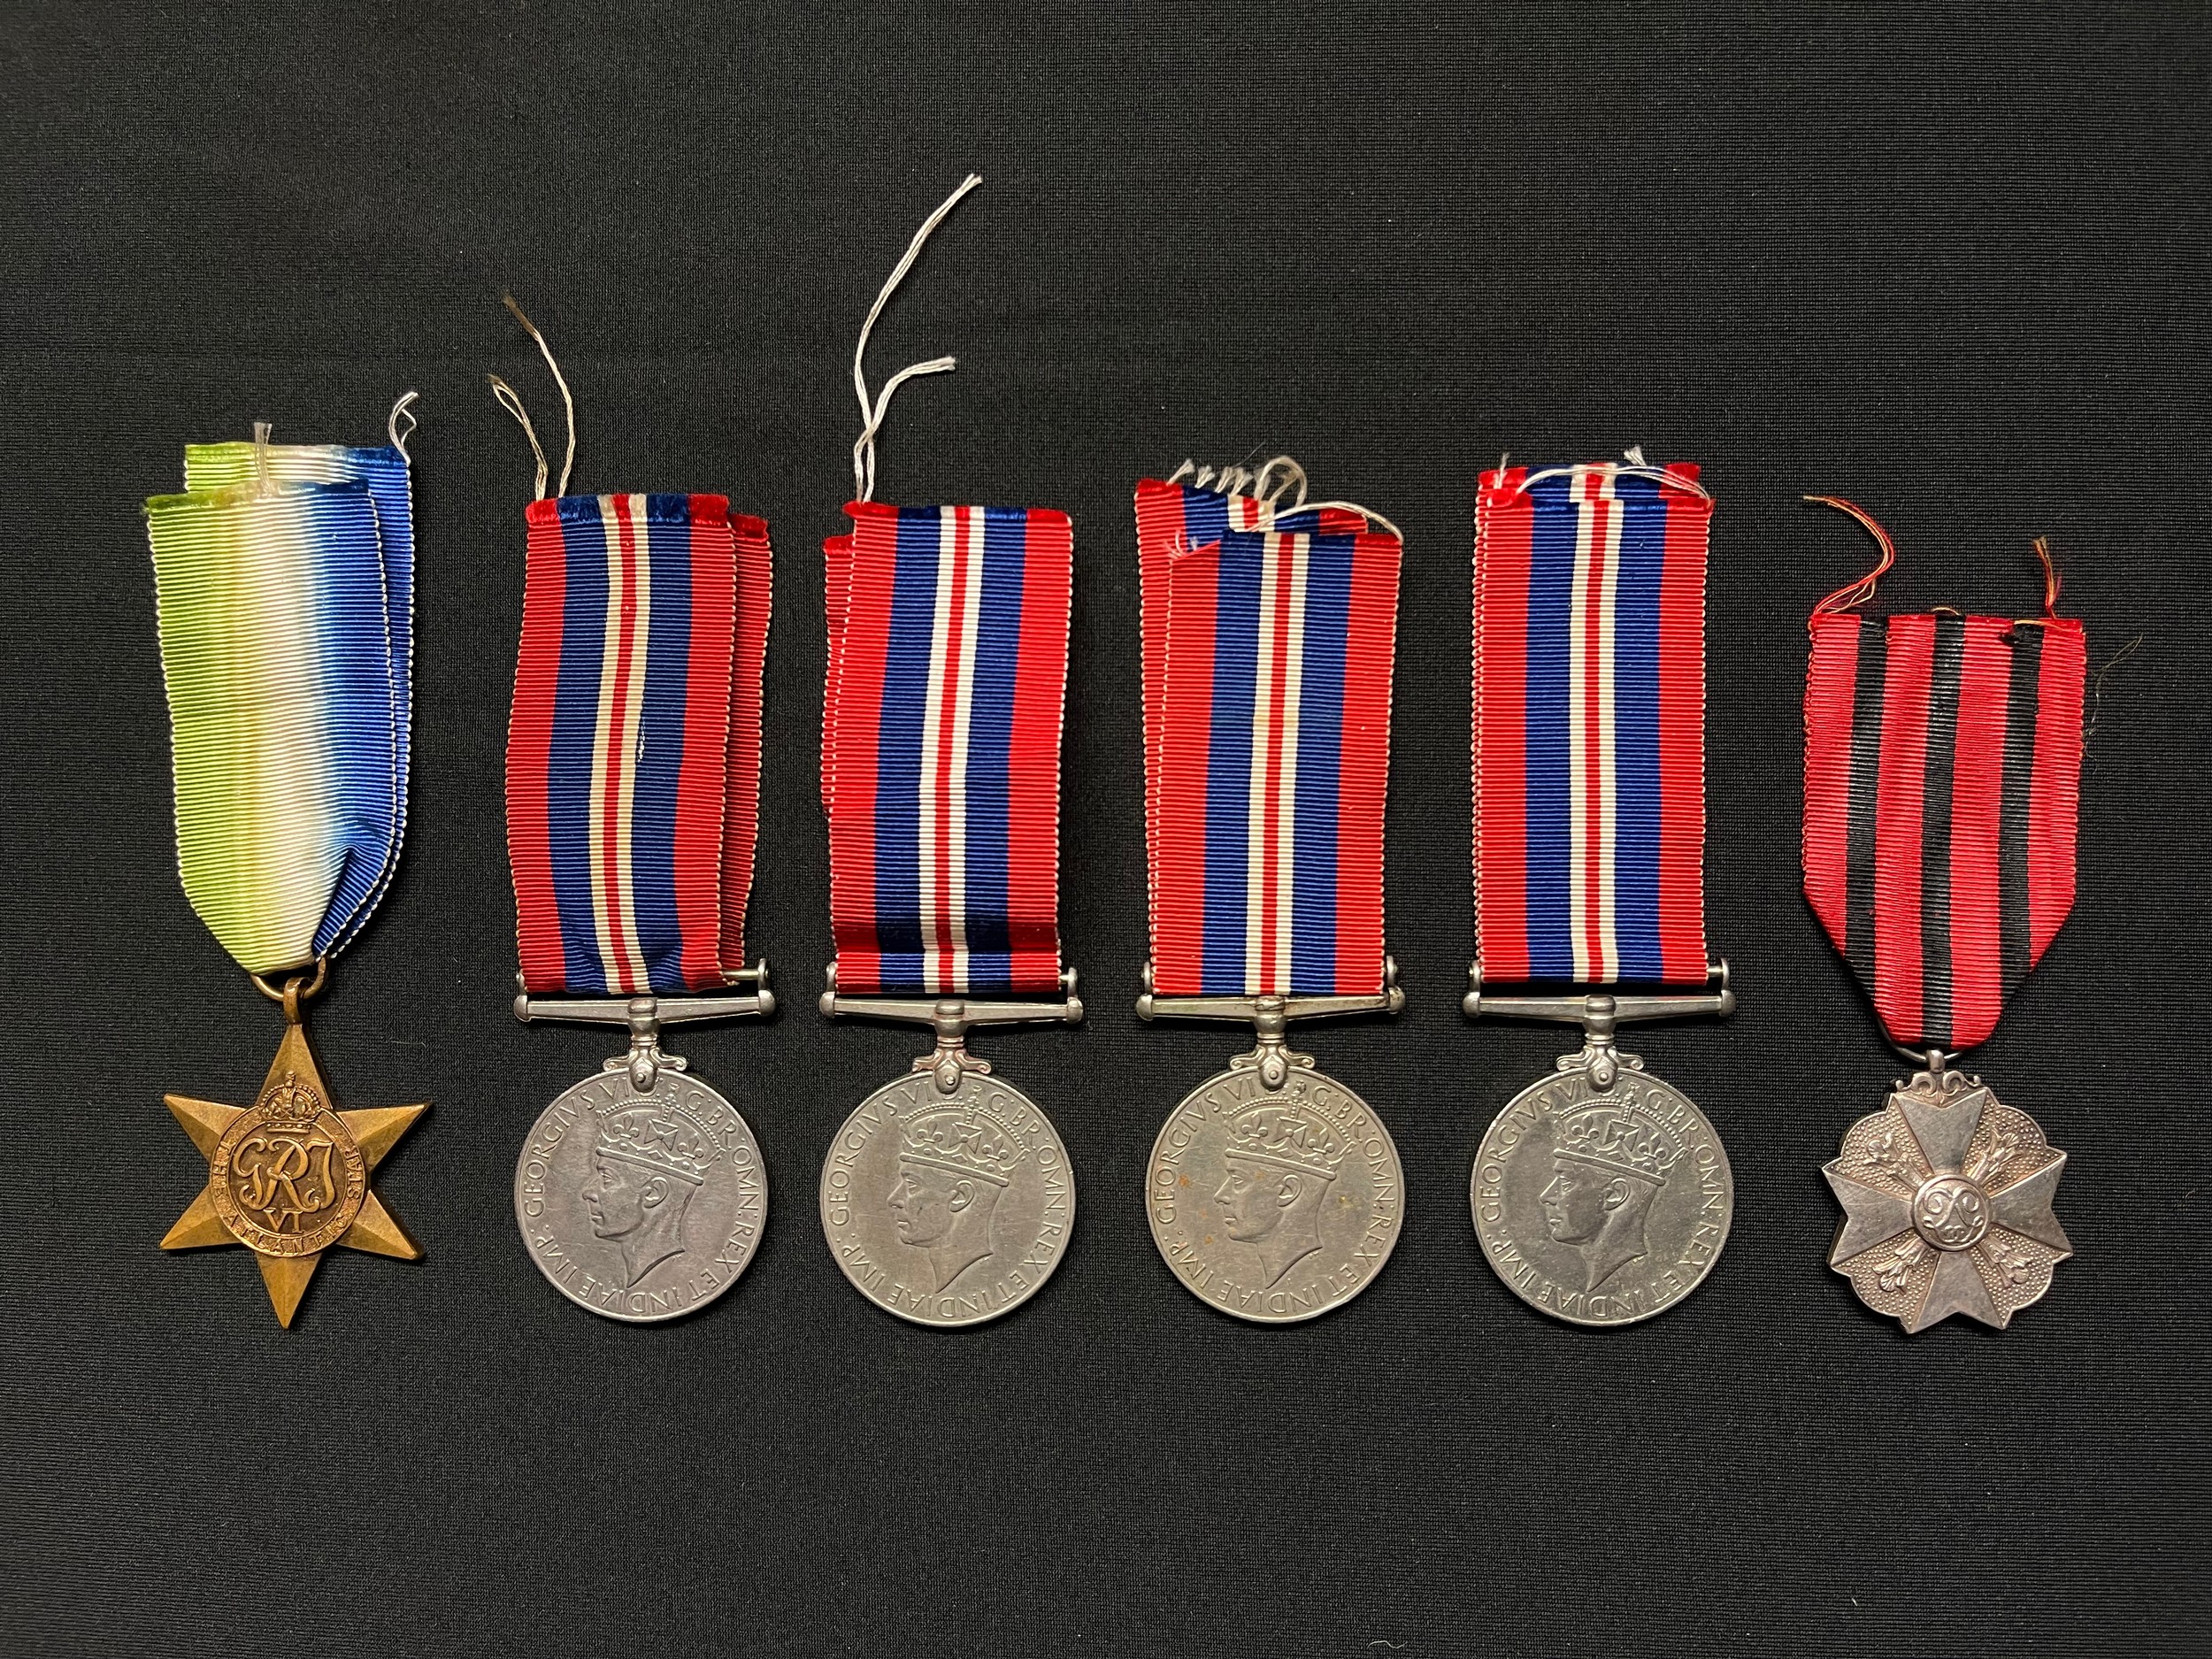 WW2 British Atlantic Star with ribbon: British War Medals x 4, complete with ribbons, Kingdom of